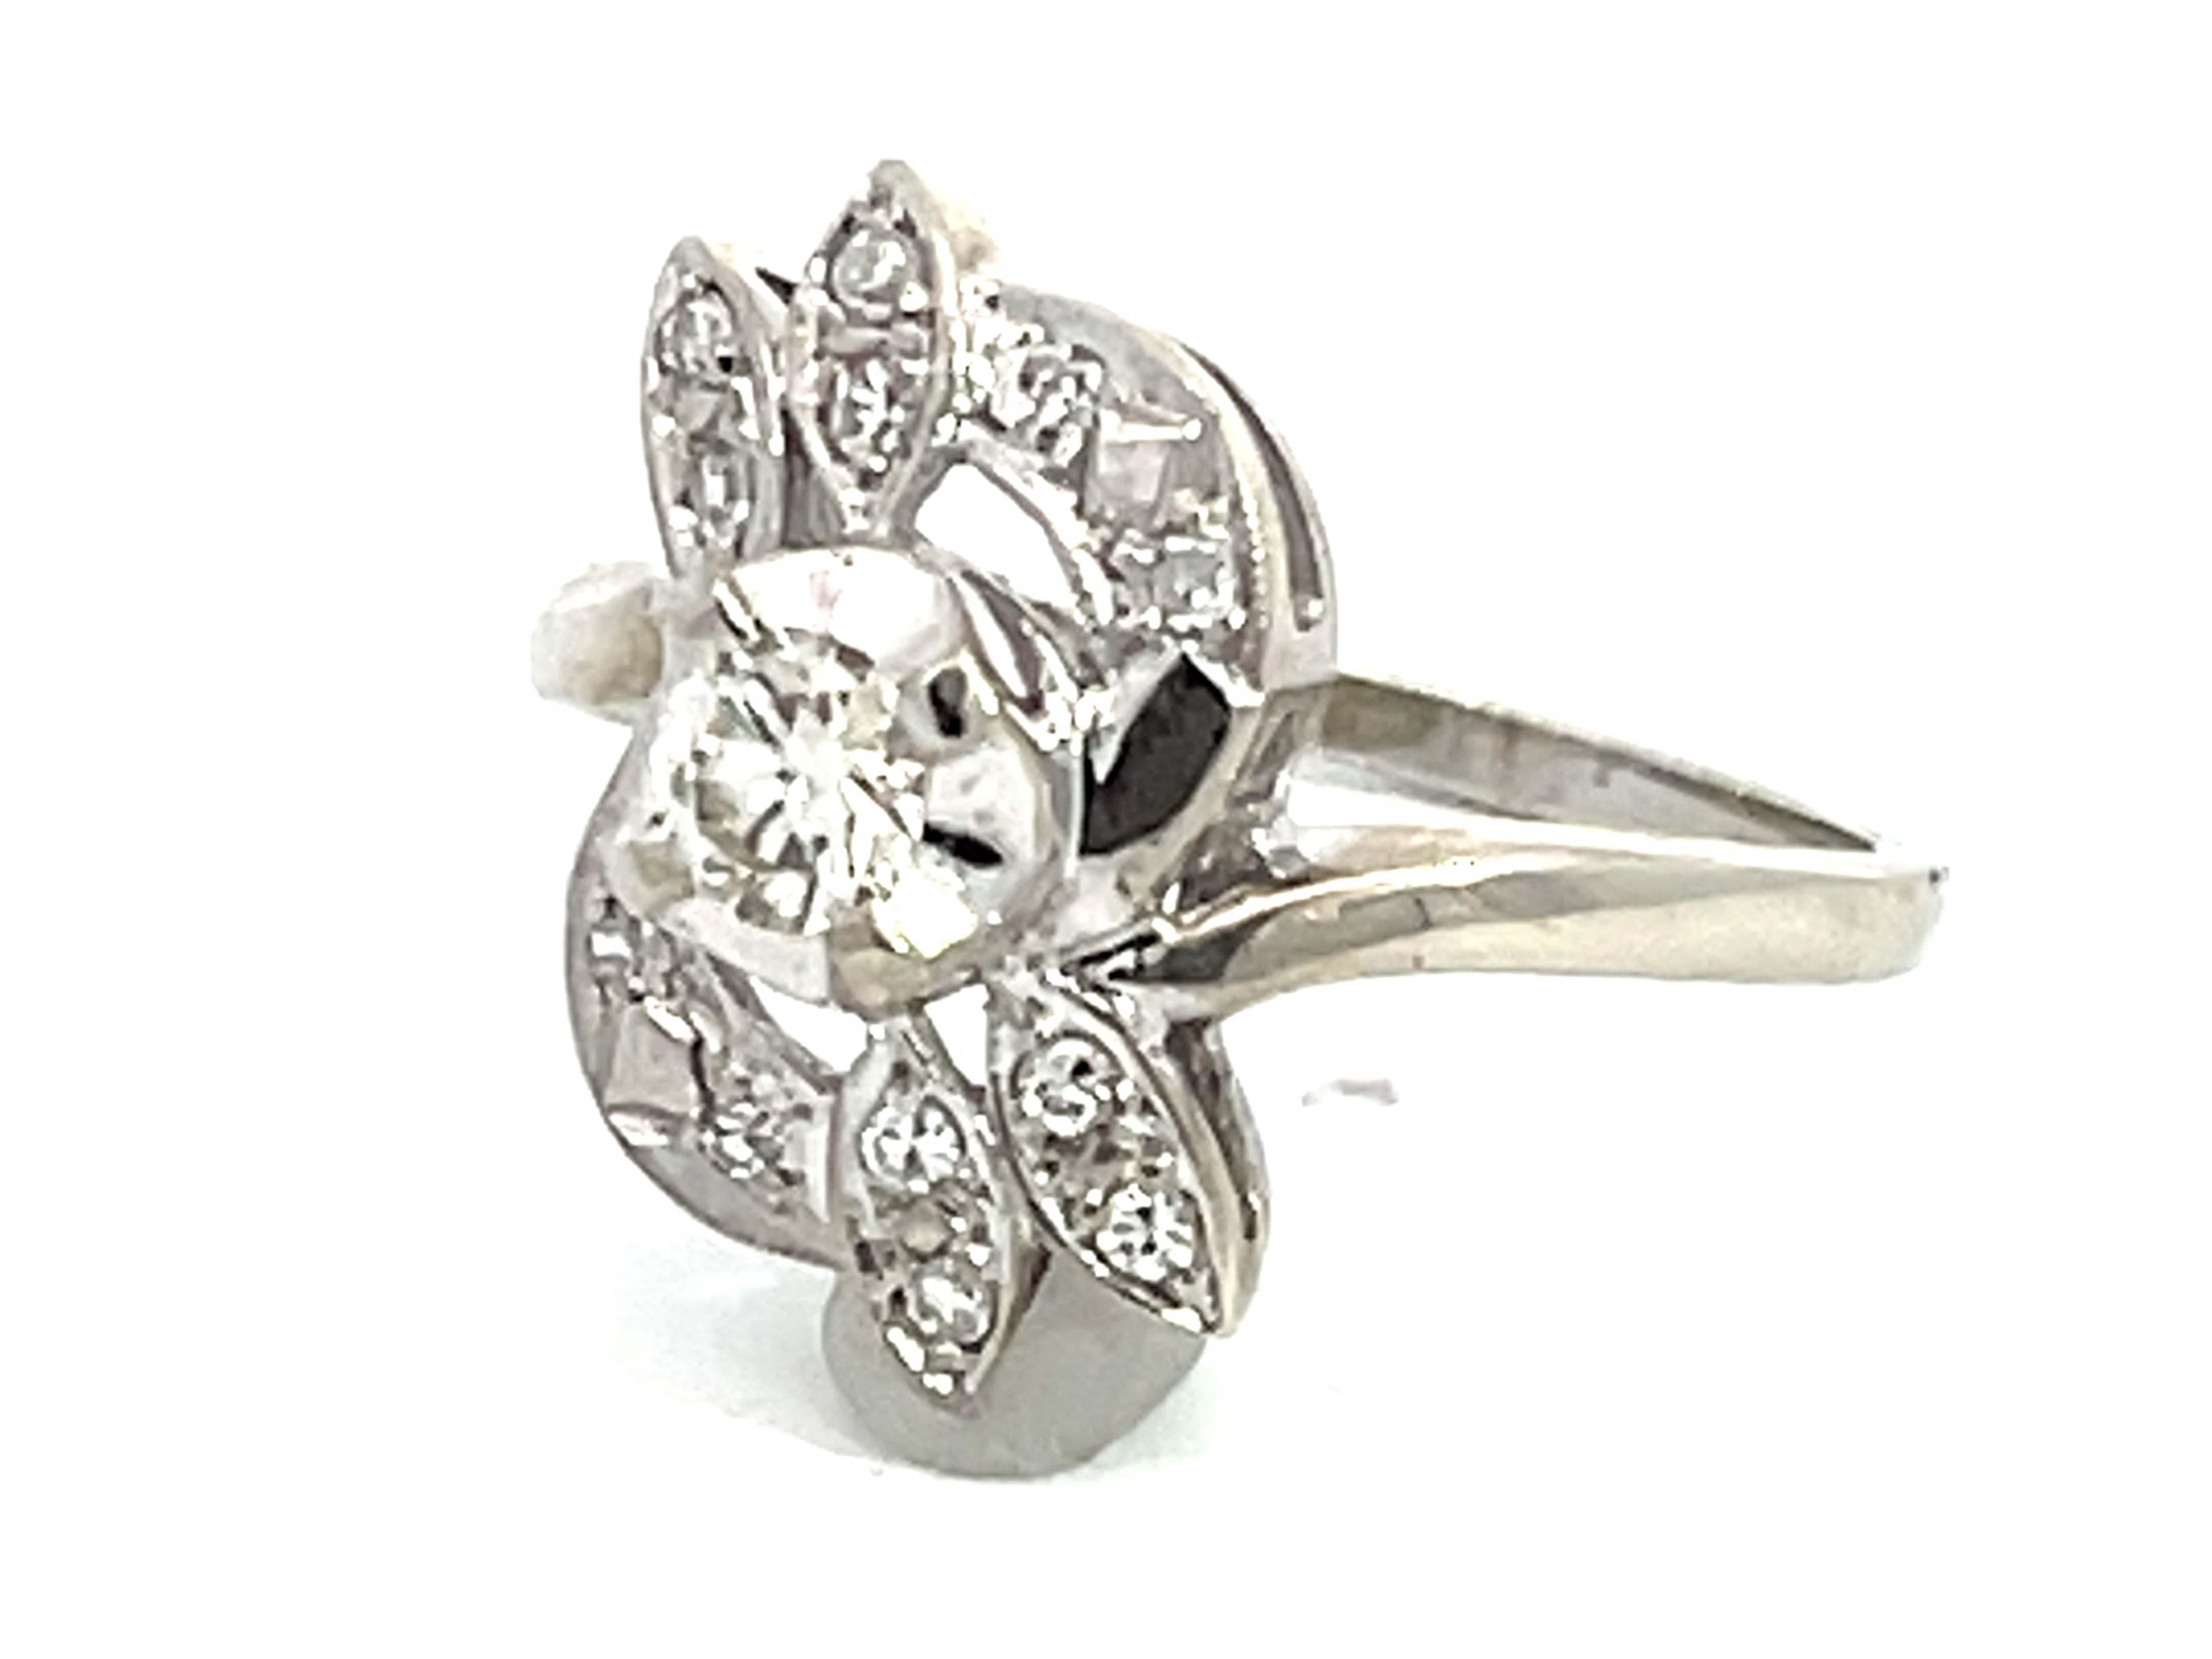 Single Cut Vintage Transition Cut Diamond Ring in 14k White Gold For Sale